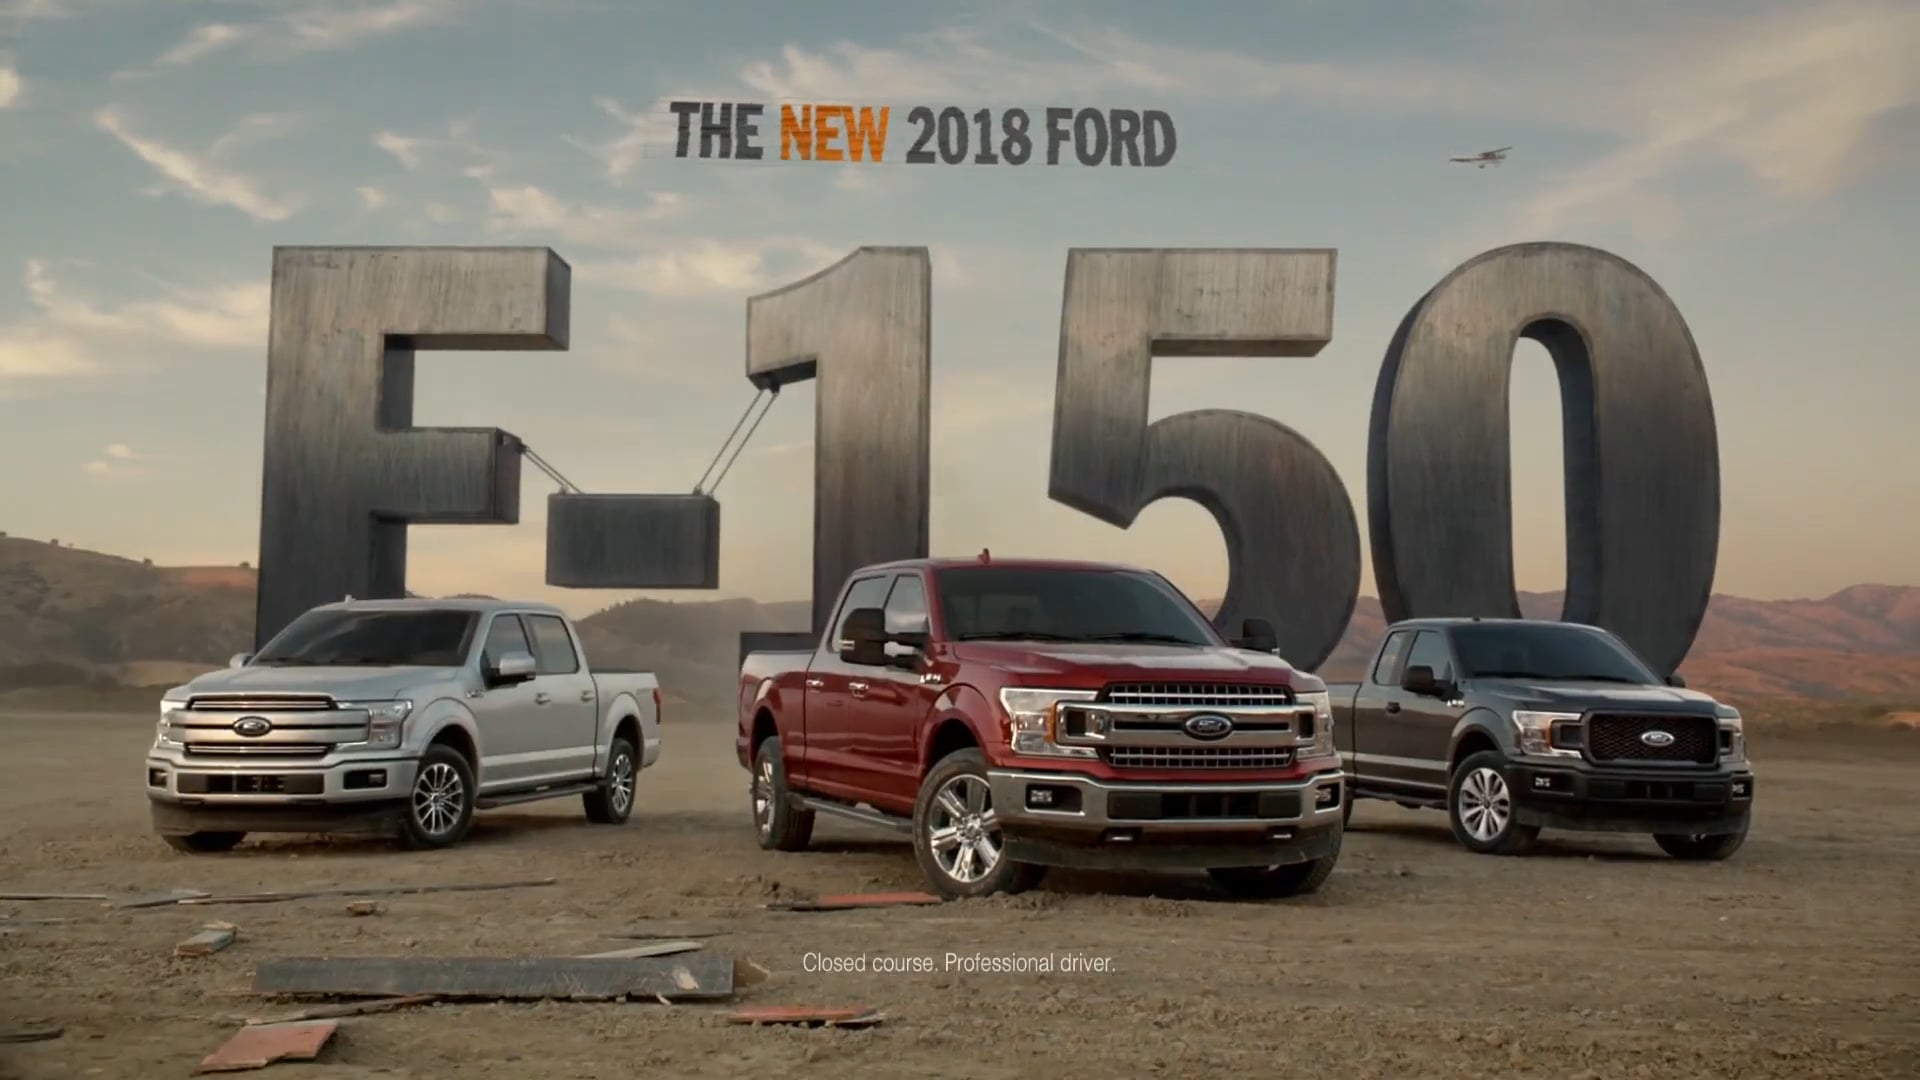 The New 2018 F-150 Rewrites the Truck Laws